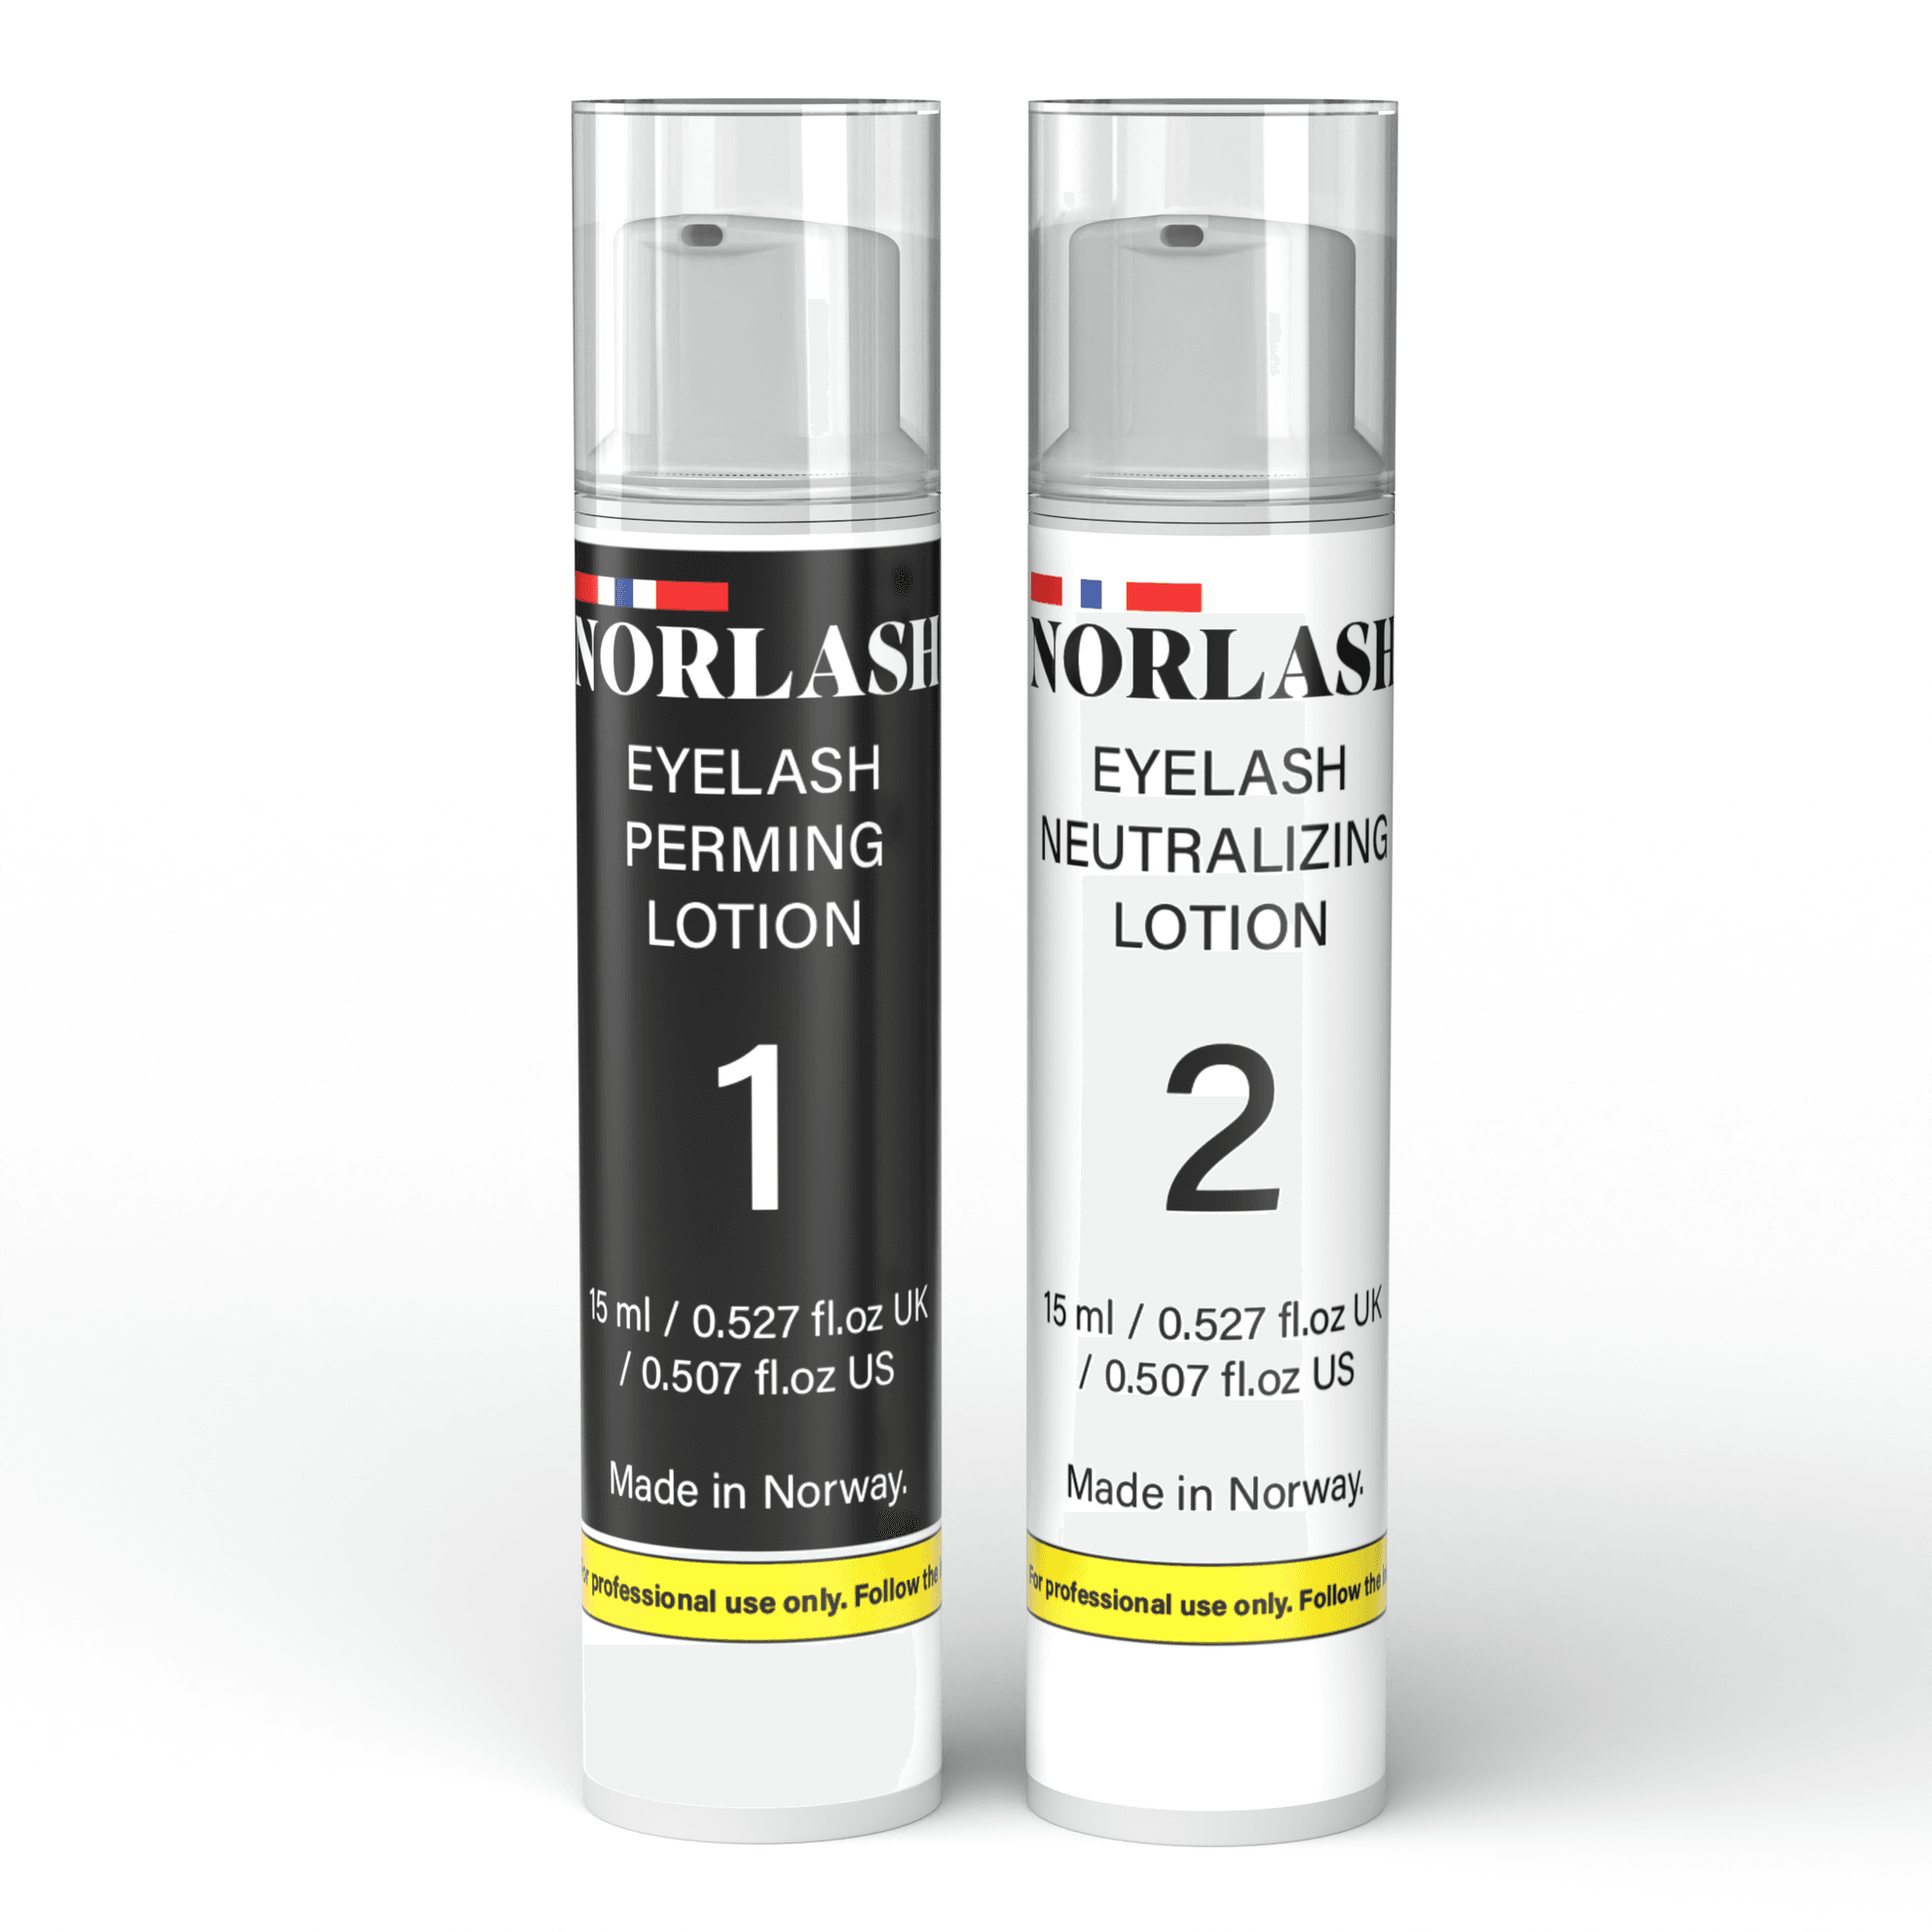 A bottle of NORLASH perming lotion and a bottle of NORLASH neutralizing lotion. The bottles are sitting on a white background.